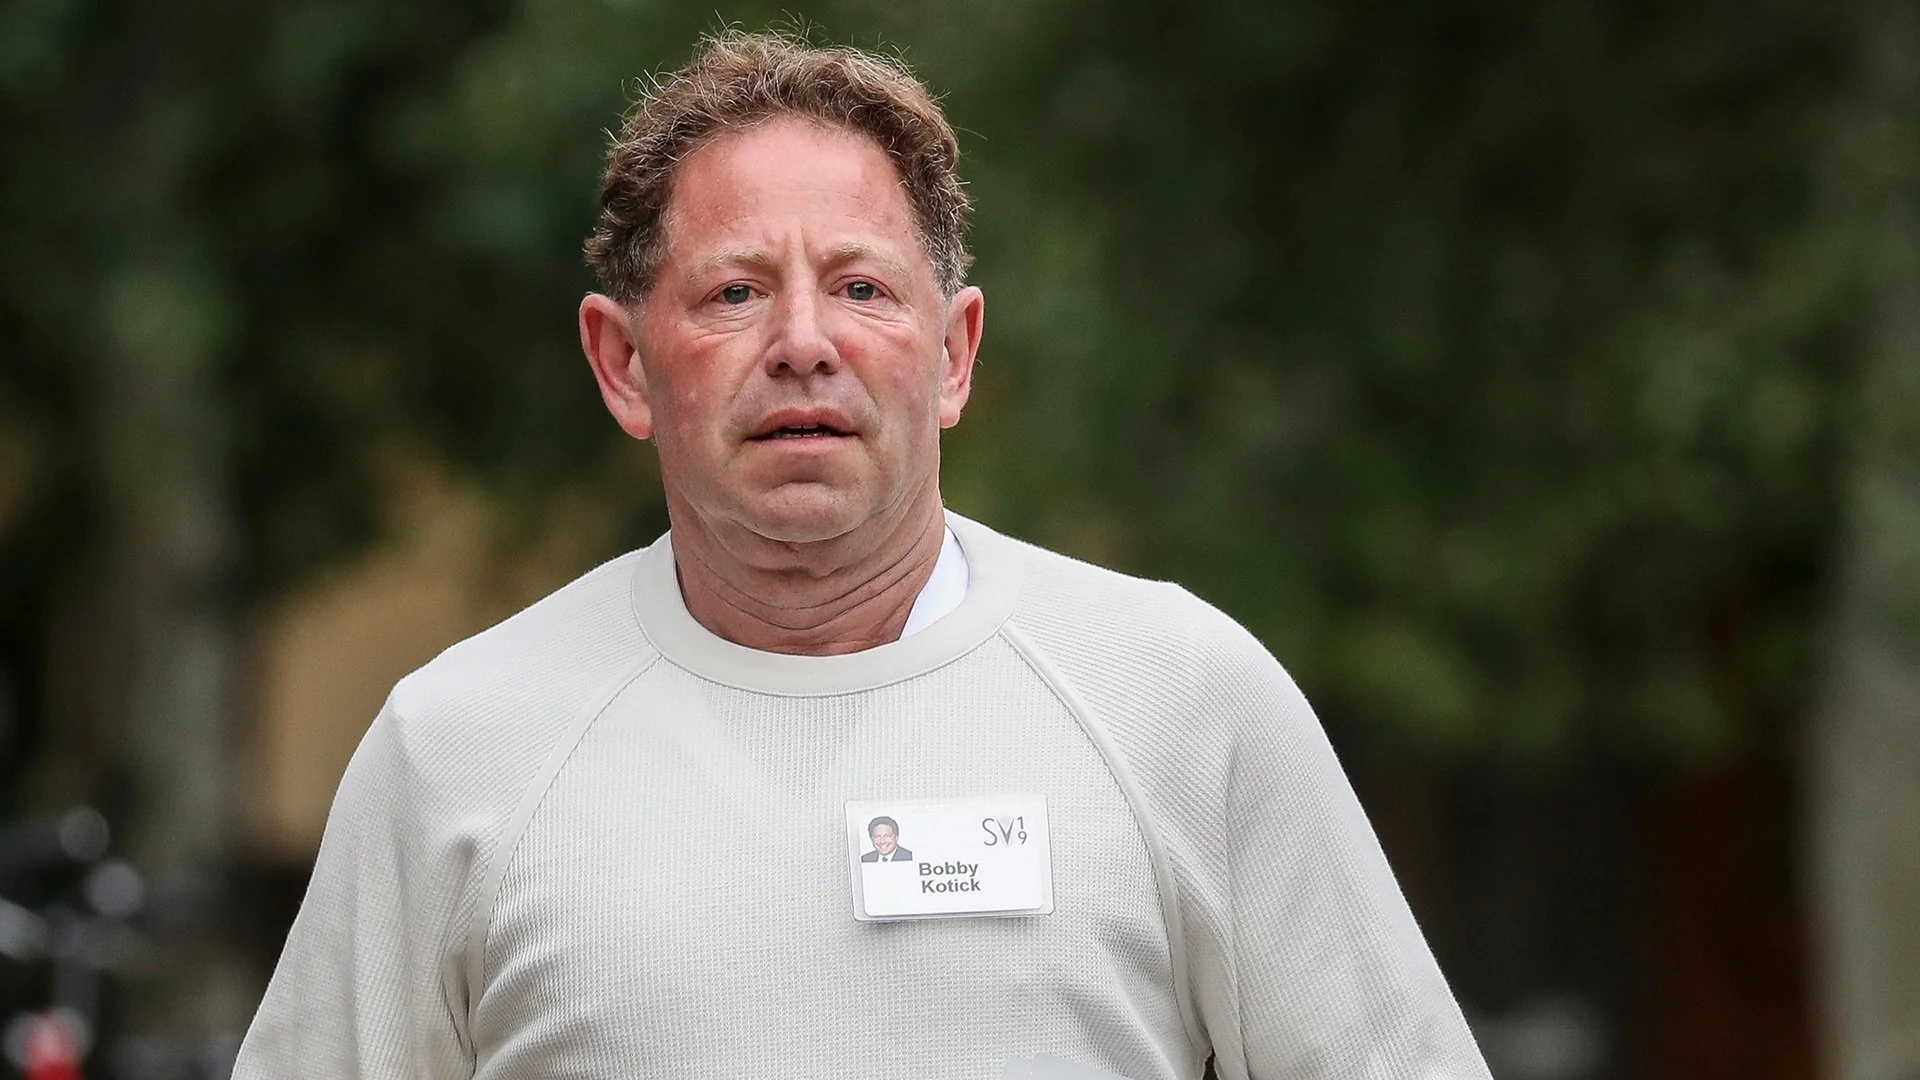 Bobby Kotick Is Being Flayed On Social Media